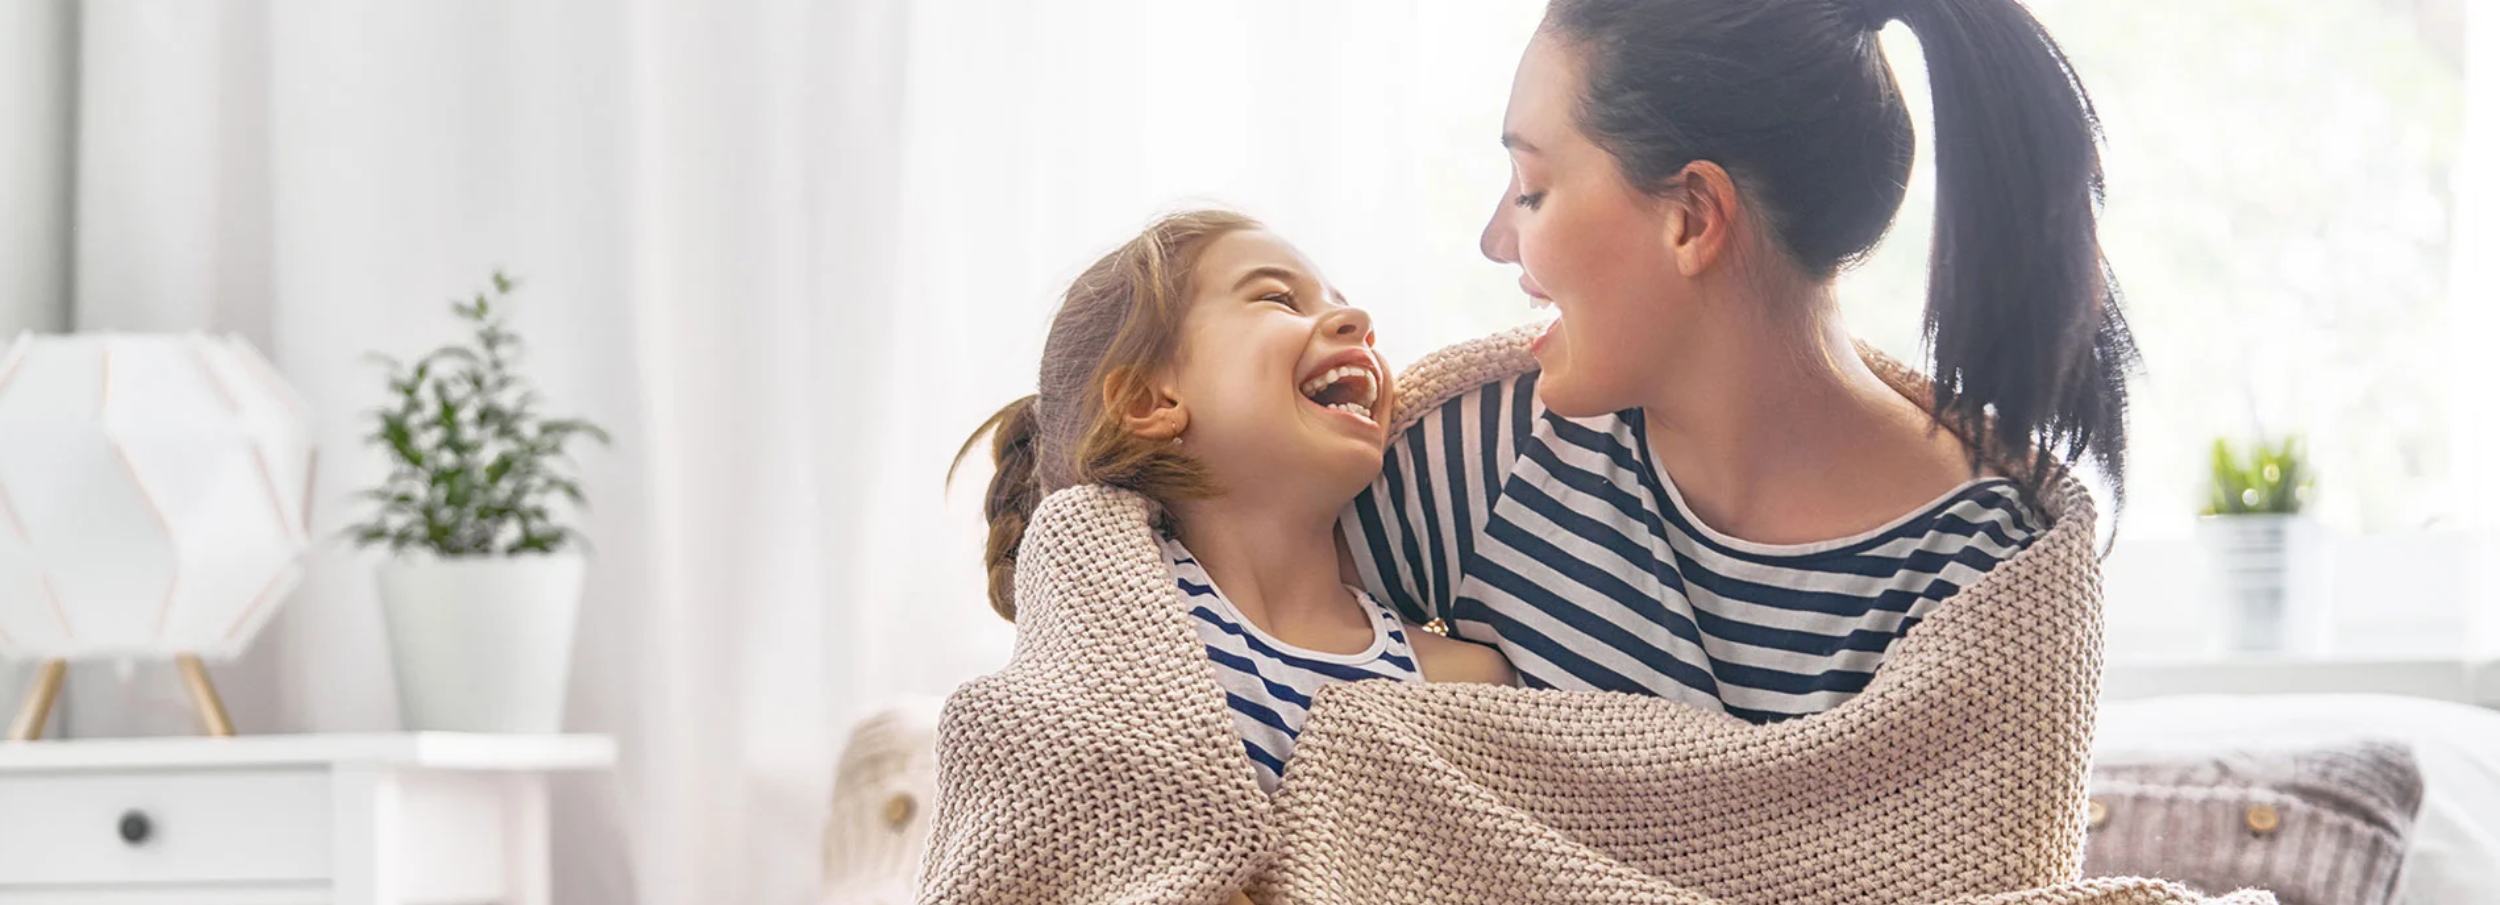 Mother and daughter wrapped in a blanket laughing.